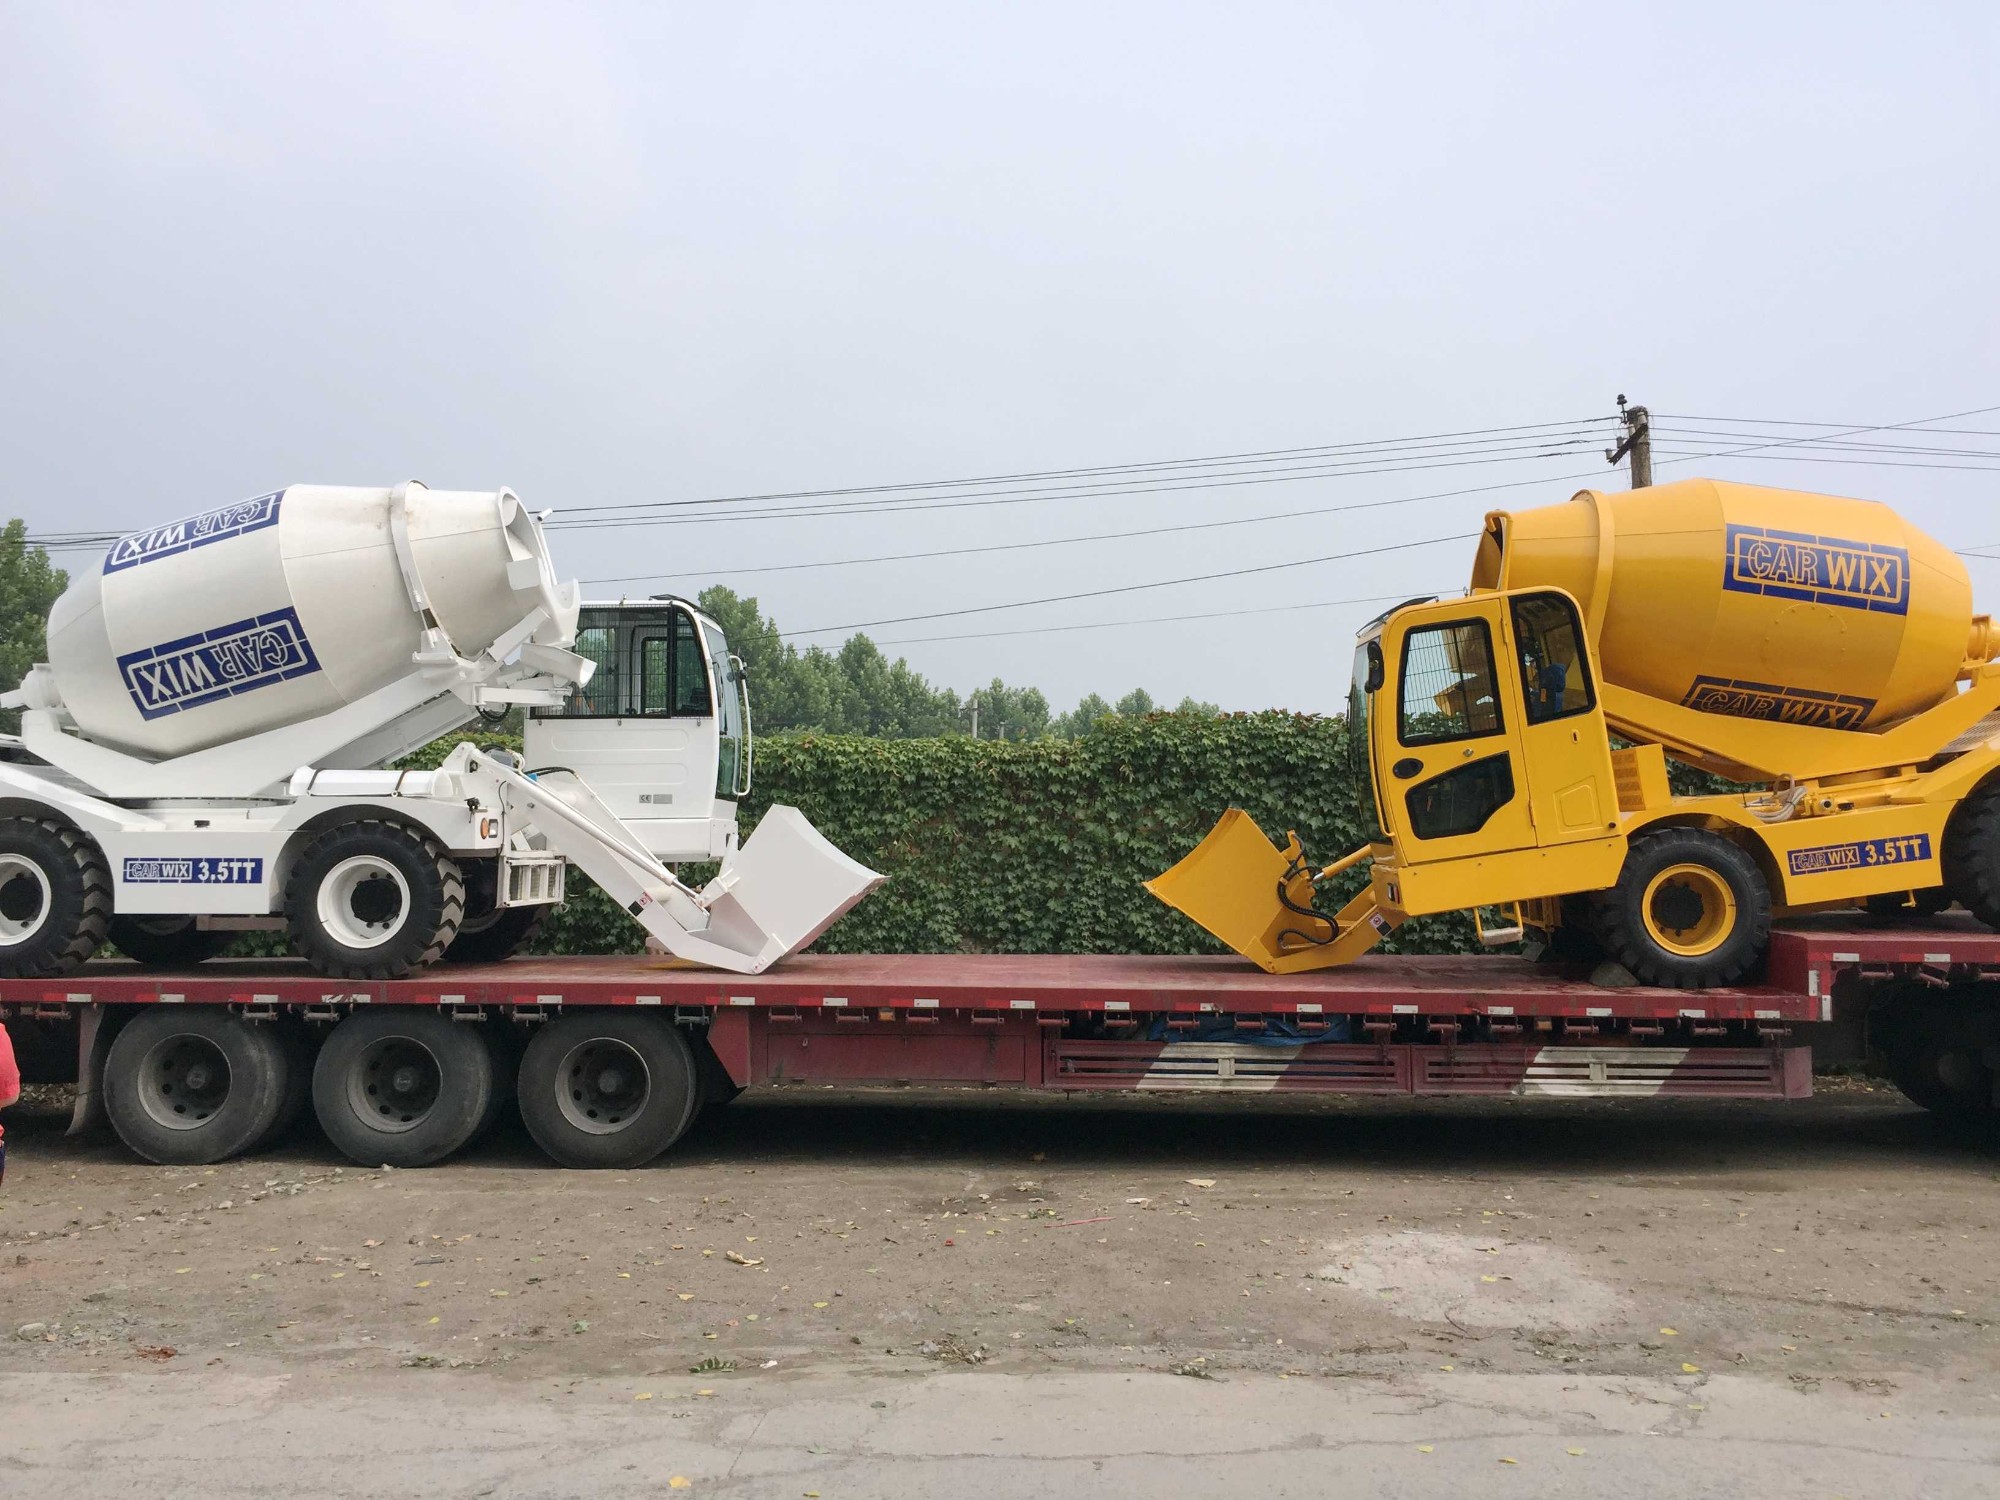 Sales 4M3 Self-loading Concrete Mixer Truck With 125 HP Engine, Buy 4M3 Self-loading Concrete Mixer Truck With 125 HP Engine, 4M3 Self-loading Concrete Mixer Truck With 125 HP Engine Factory, 4M3 Self-loading Concrete Mixer Truck With 125 HP Engine Brands